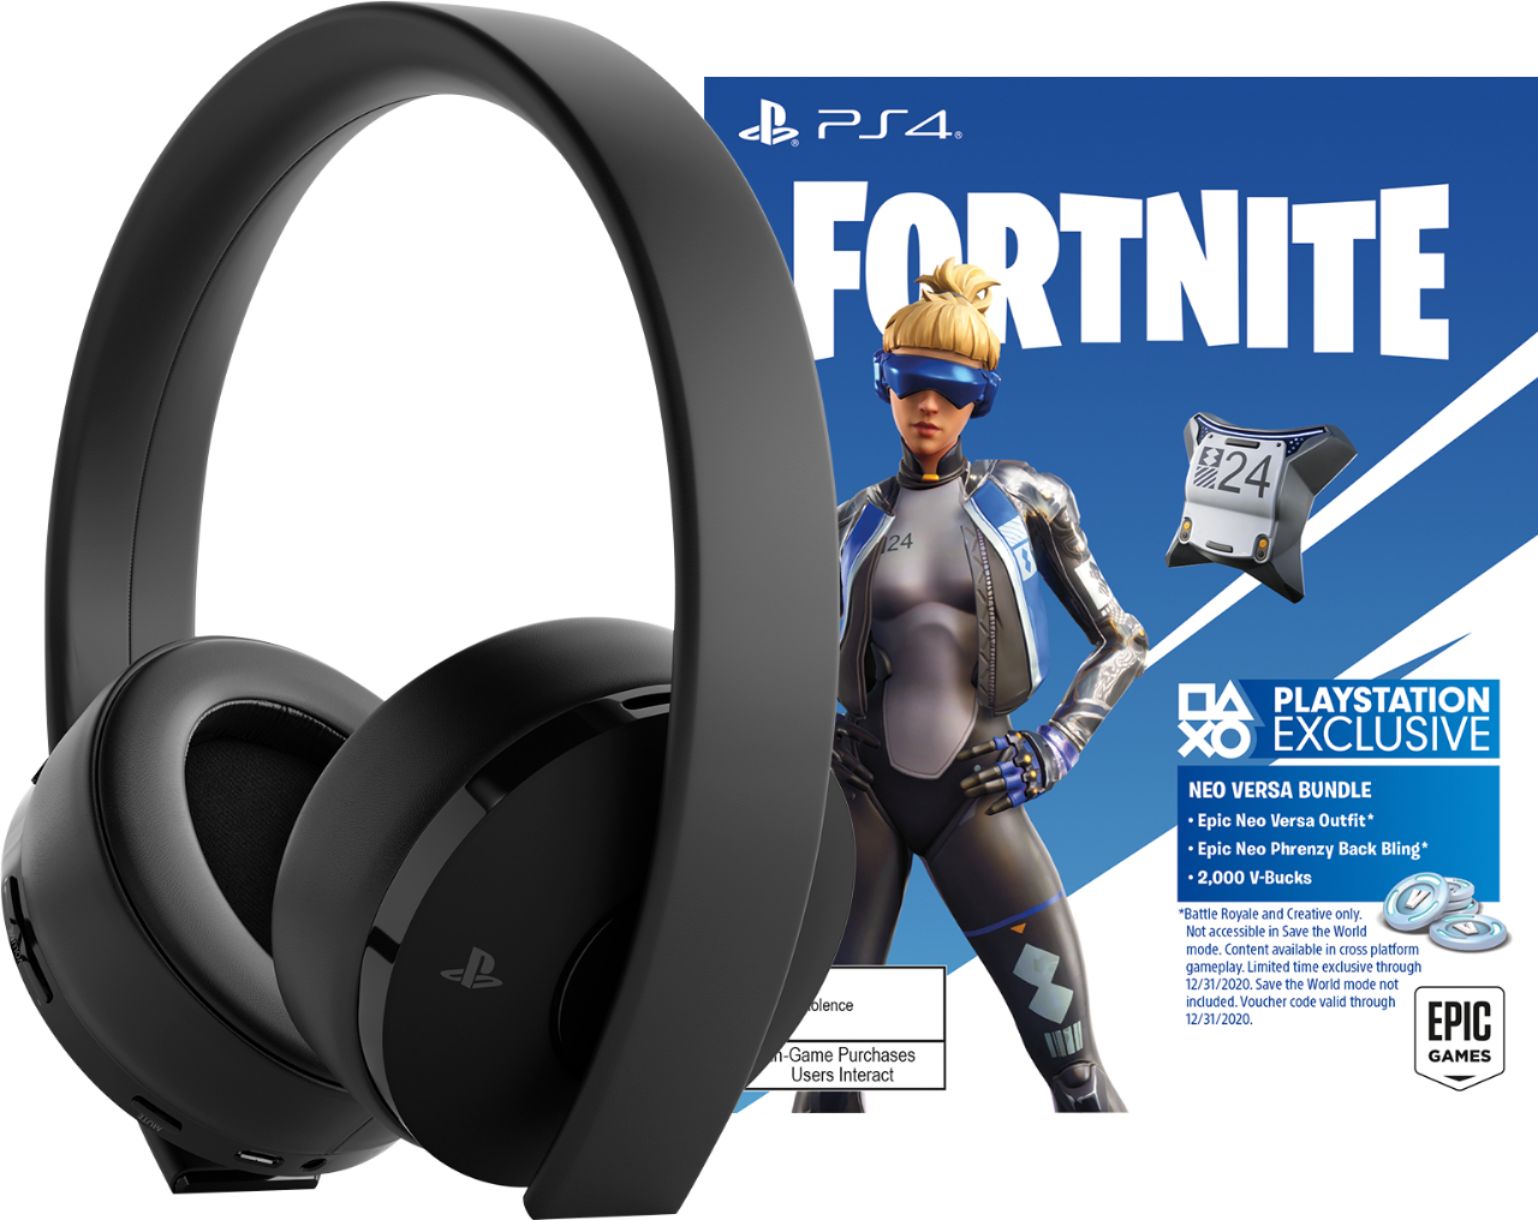 kanaal tuberculose Robijn Sony - Fortnite Neo Versa Gold Wireless Stereo Headset for PlayStation 4,  PlayStation VR, Mobile Devices and Select PCs - Jet Black | GiftsApp